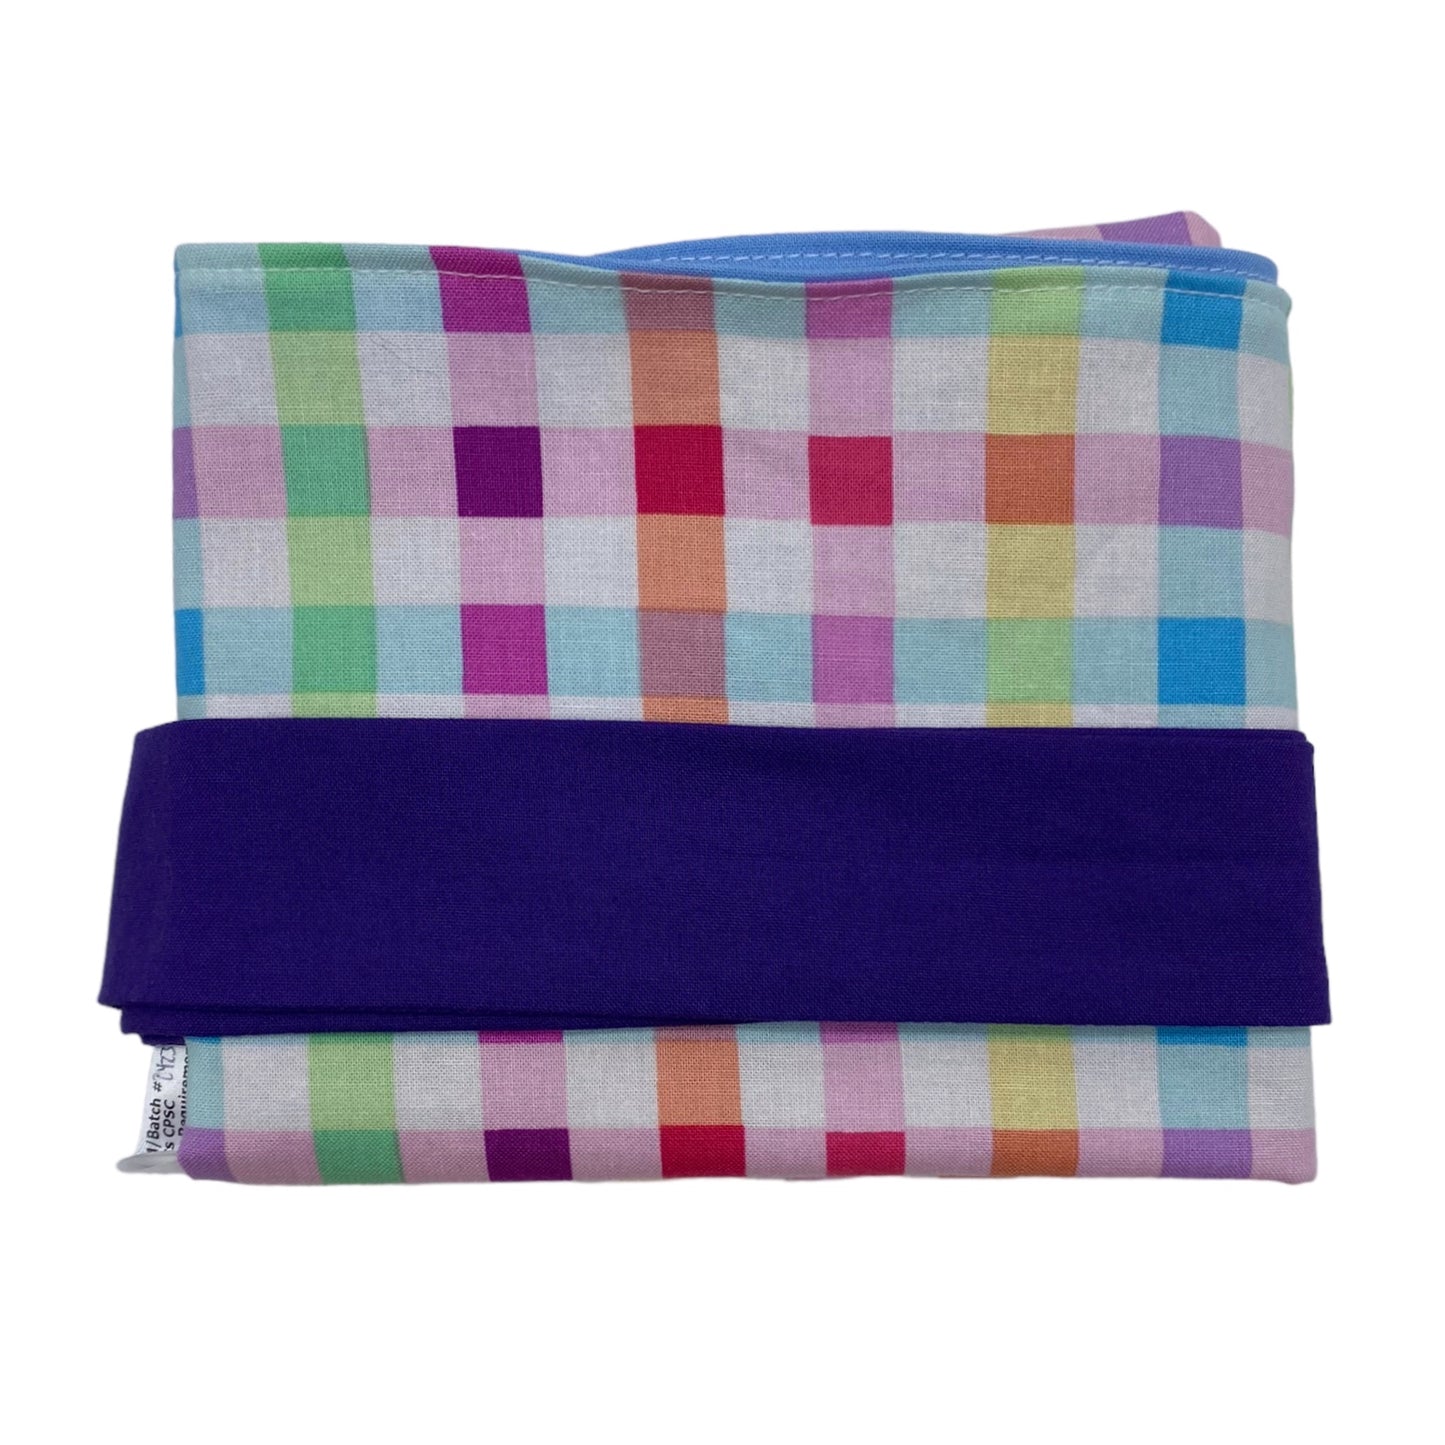 Just Right Gift Bag - Colorful Plaid